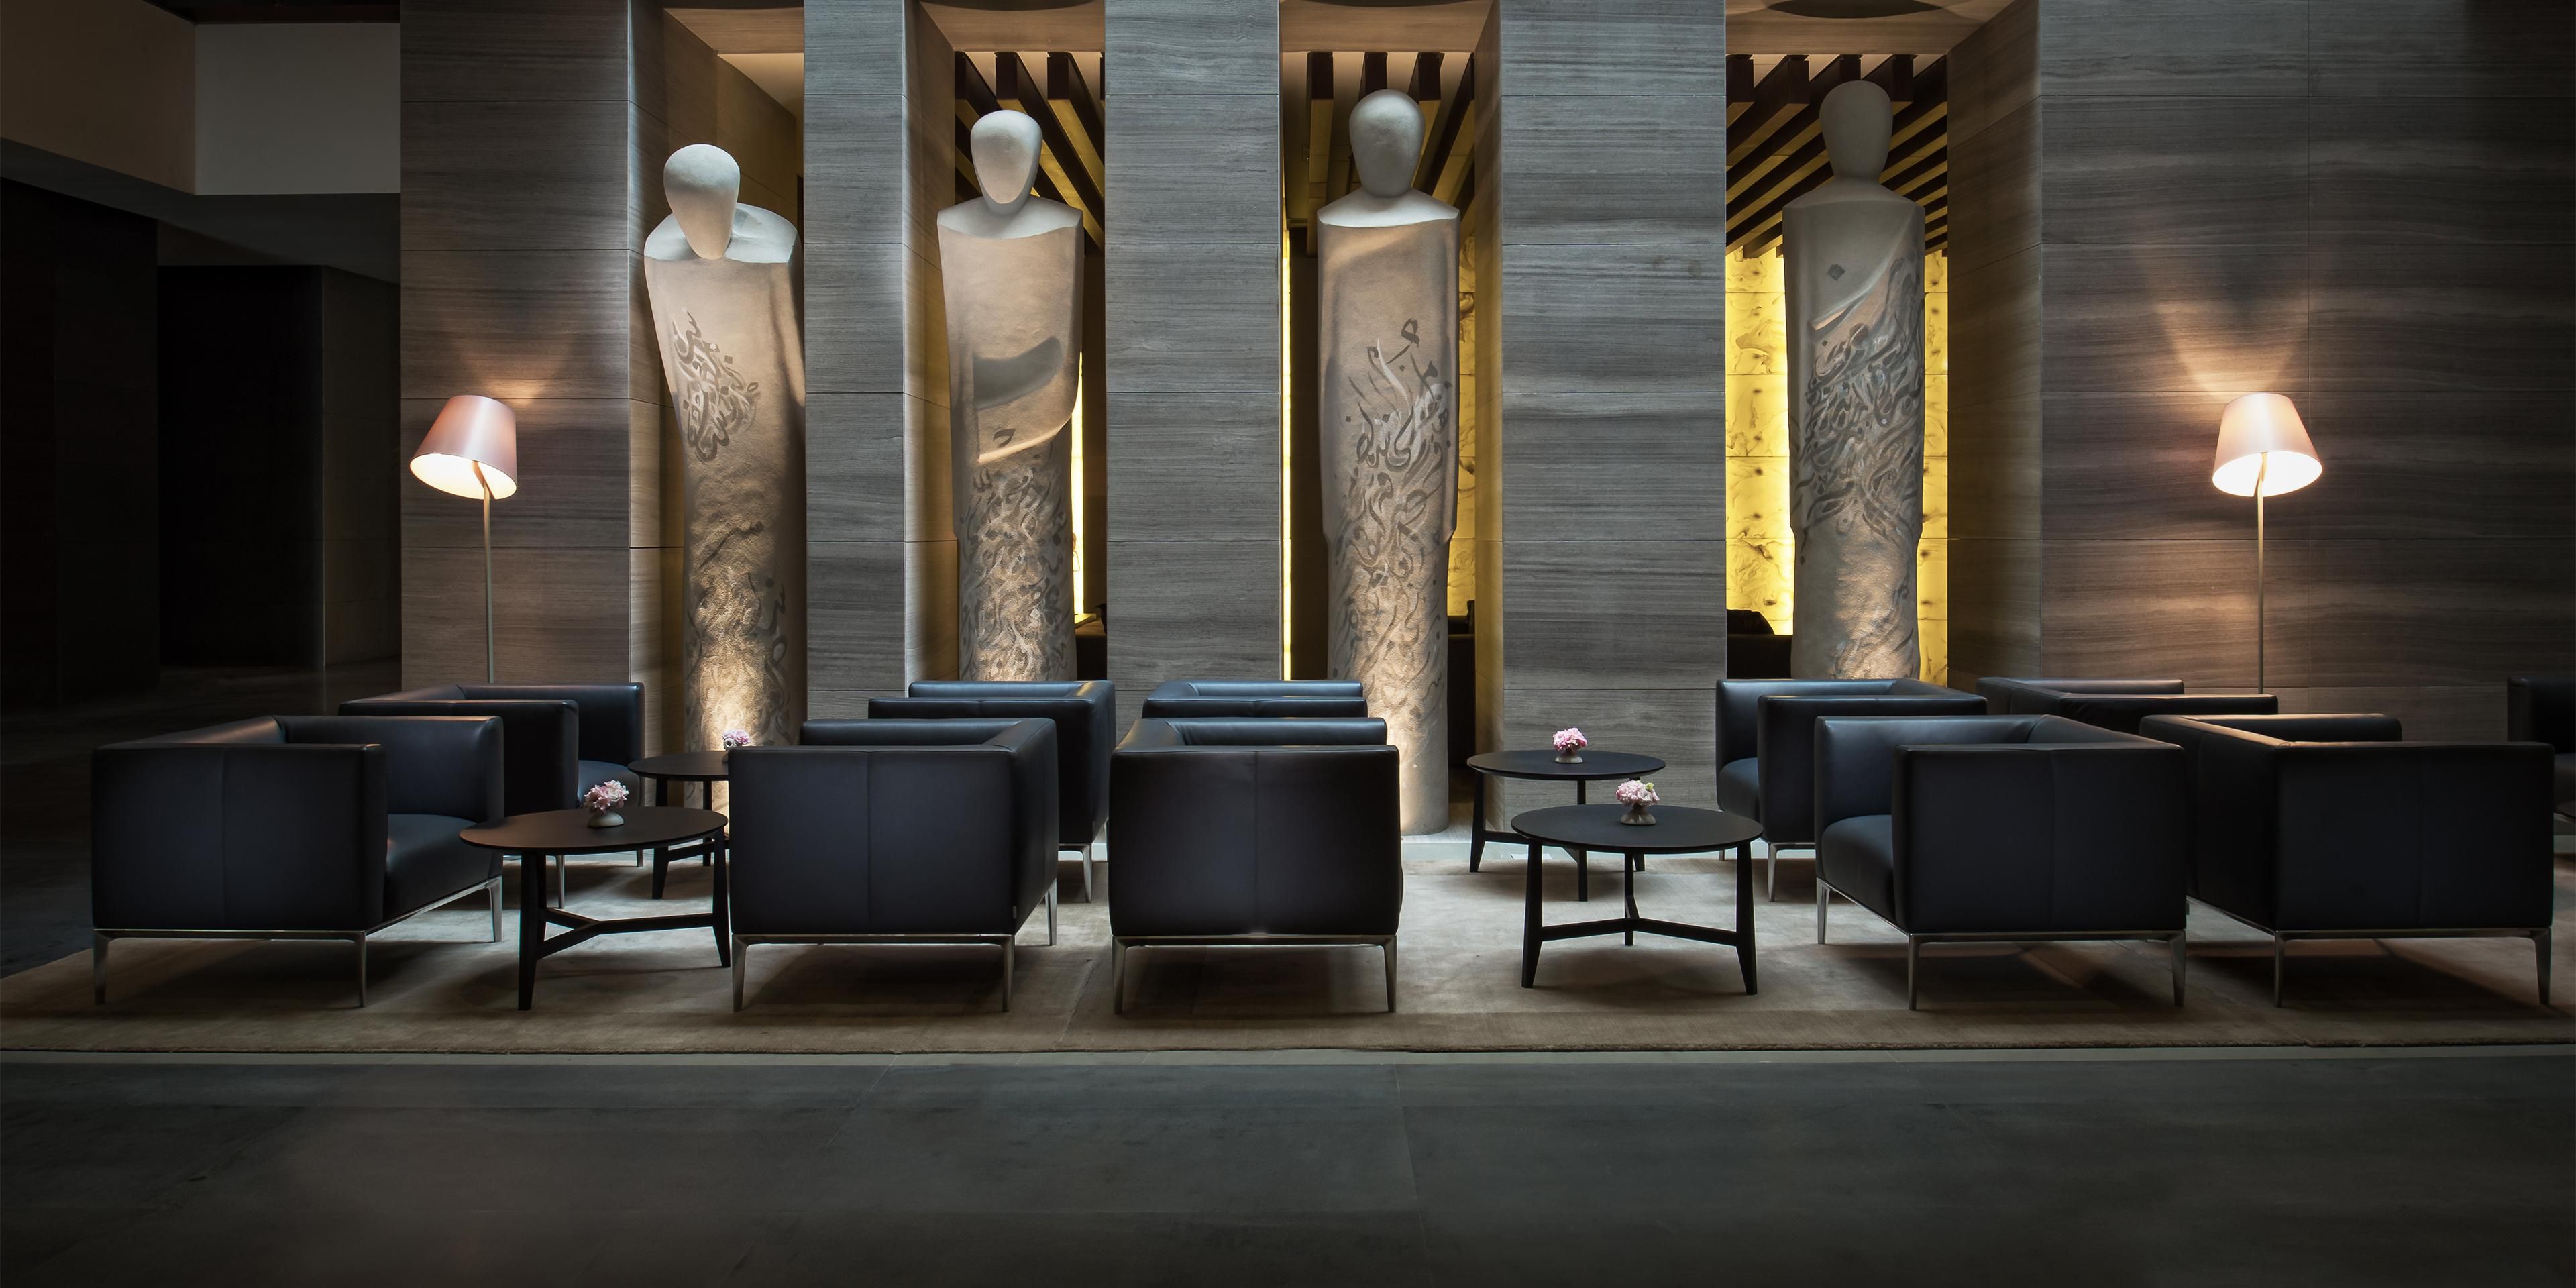 At InterContinental Dubai Marina, we have put art at the core of our design. With design furniture and bespoke art pieces scattered around, the lobby area also serves as an open-space gallery with statement statues and figurines.